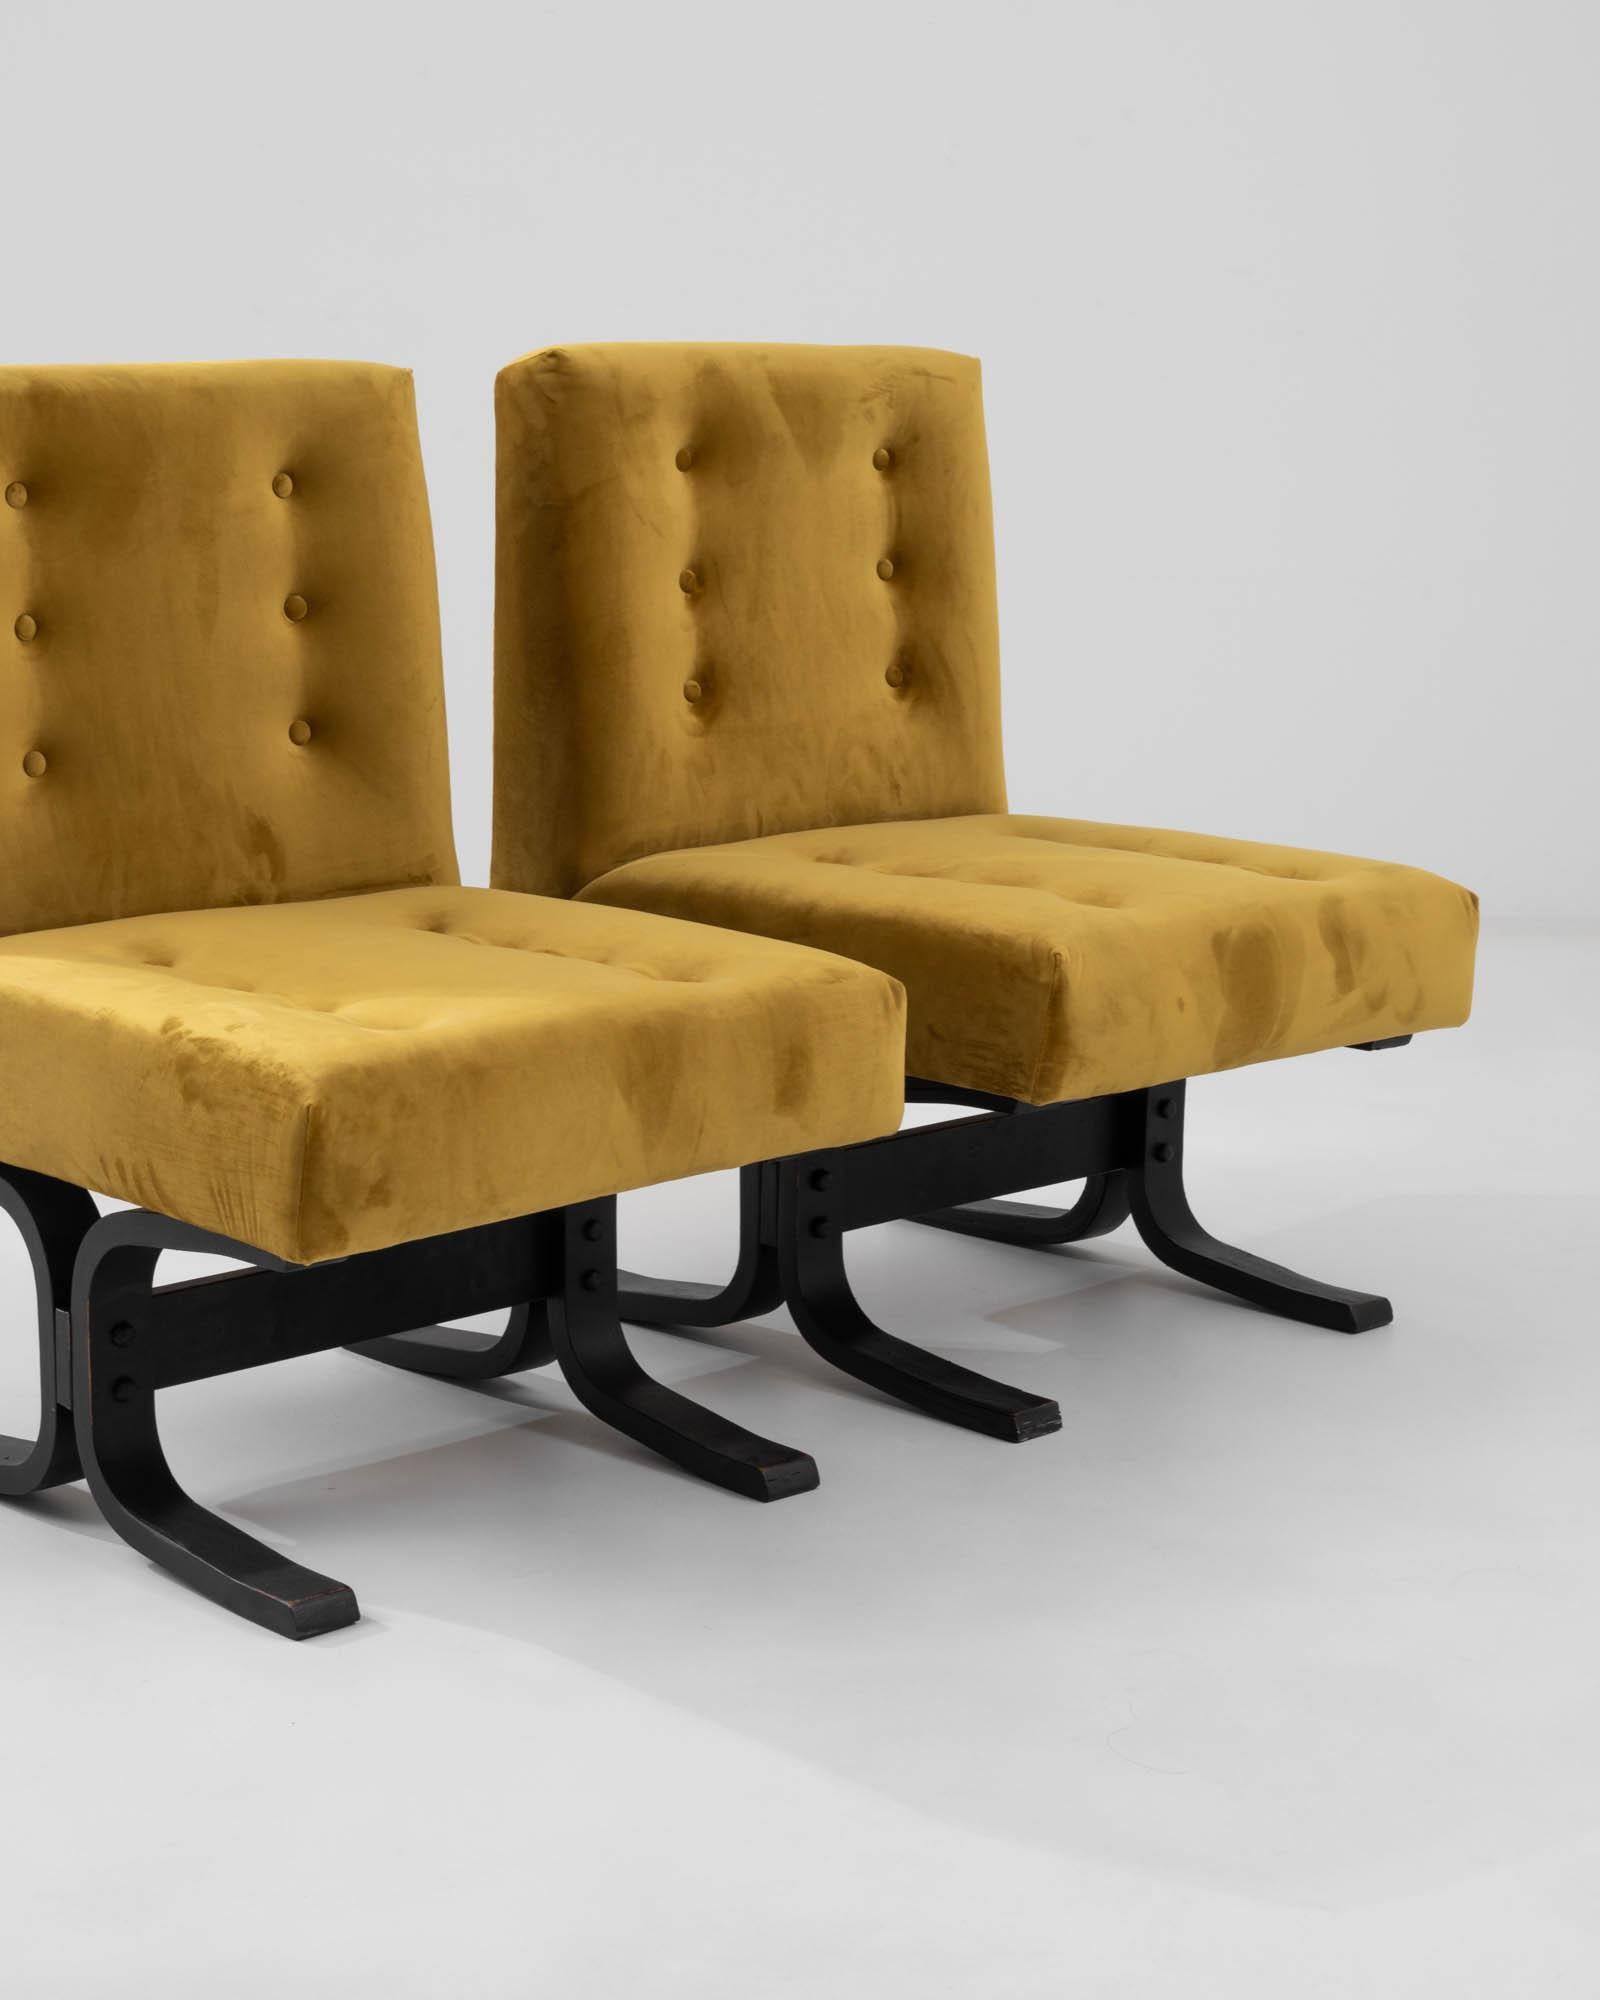 1960 Czechia Upholstered Chairs by Ludvik Volak, Set of 2 For Sale 4